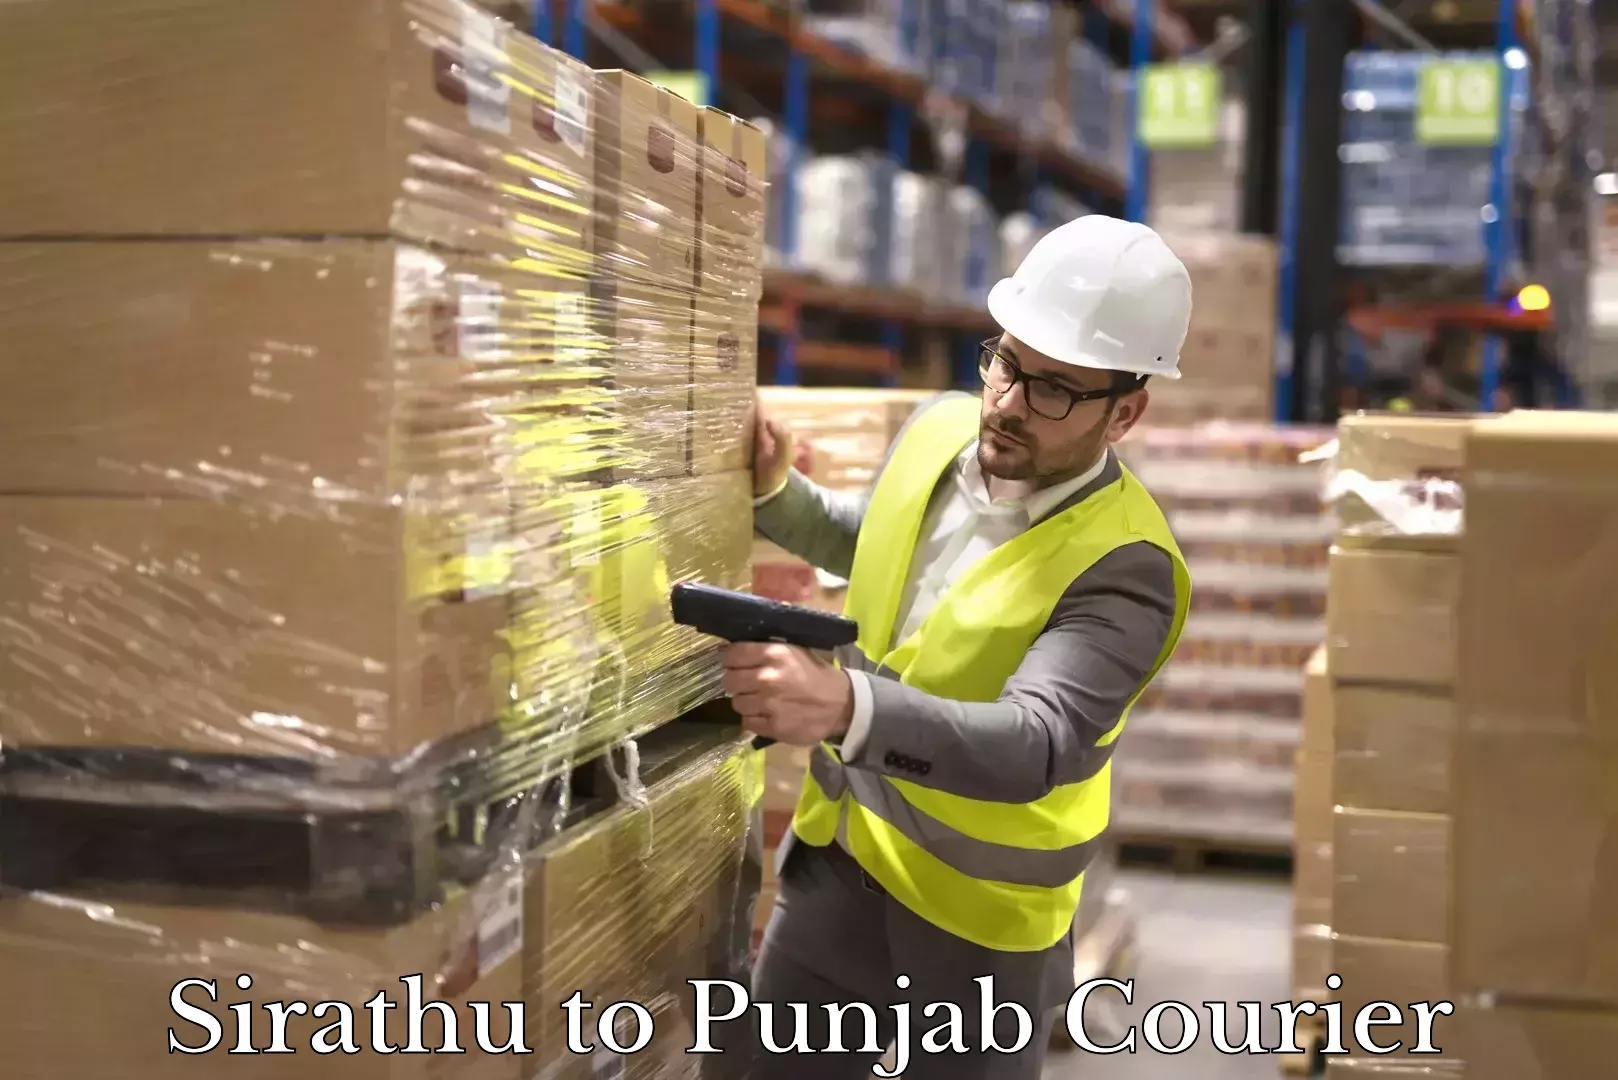 Fast delivery service Sirathu to Punjab